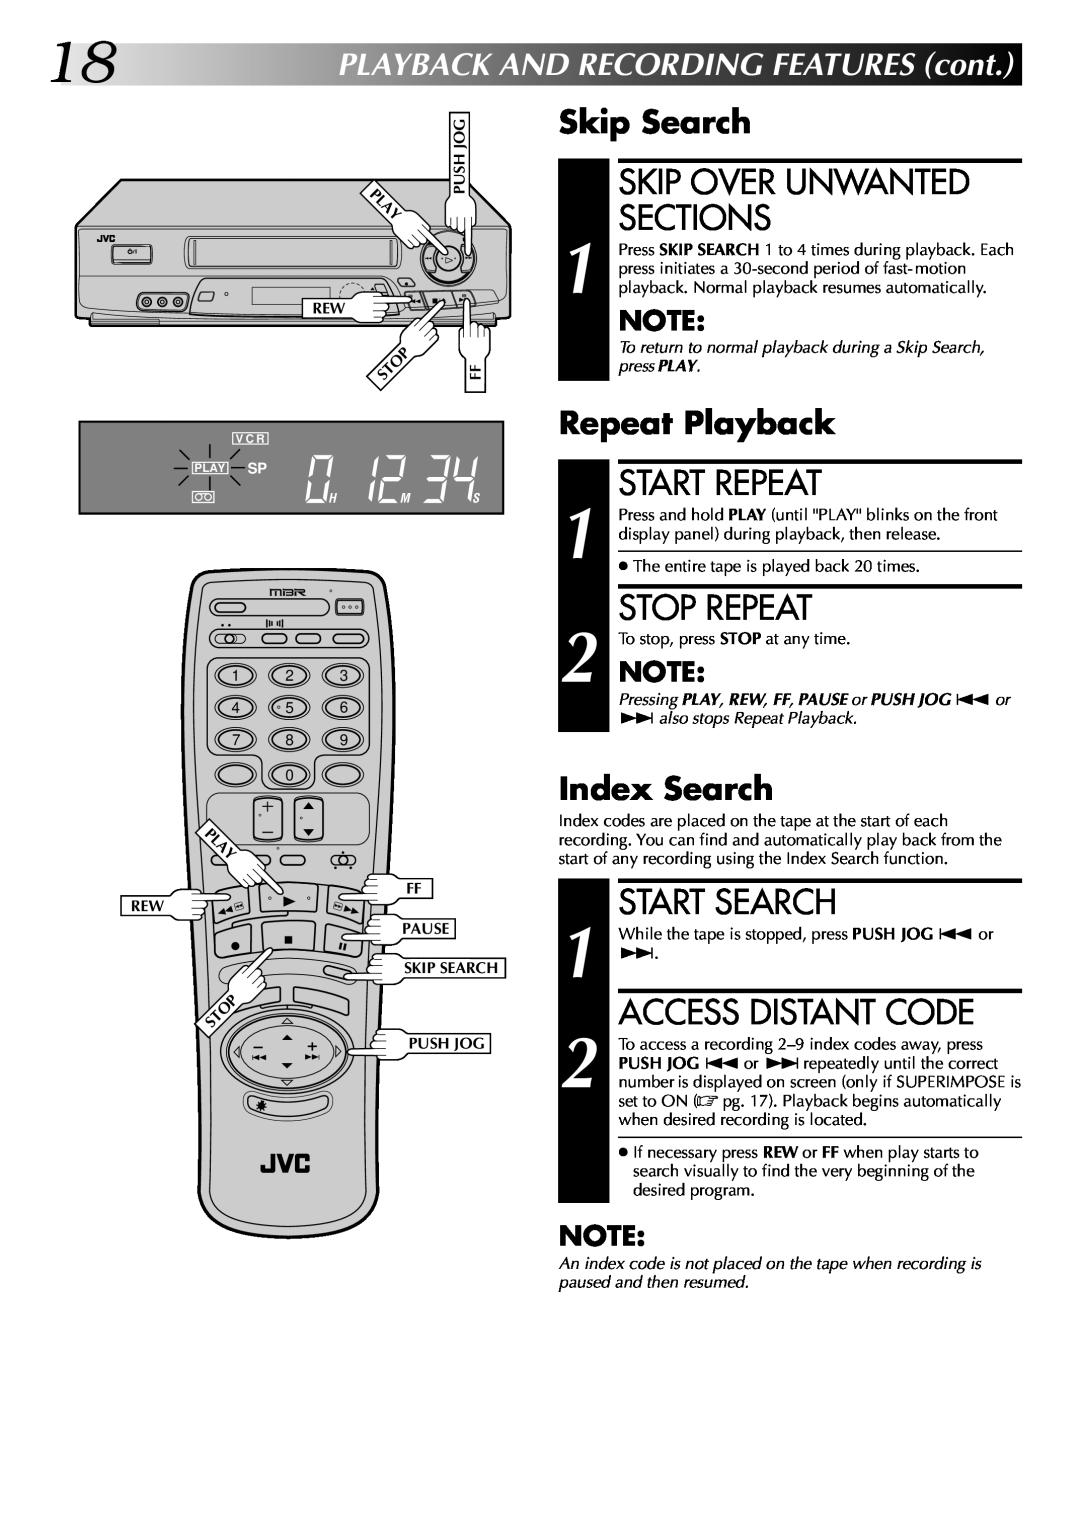 JVC HR-J7004UM Skip Over Unwanted Sections, Start Repeat, Stop Repeat, Start Search, Access Distant Code, Skip Search 